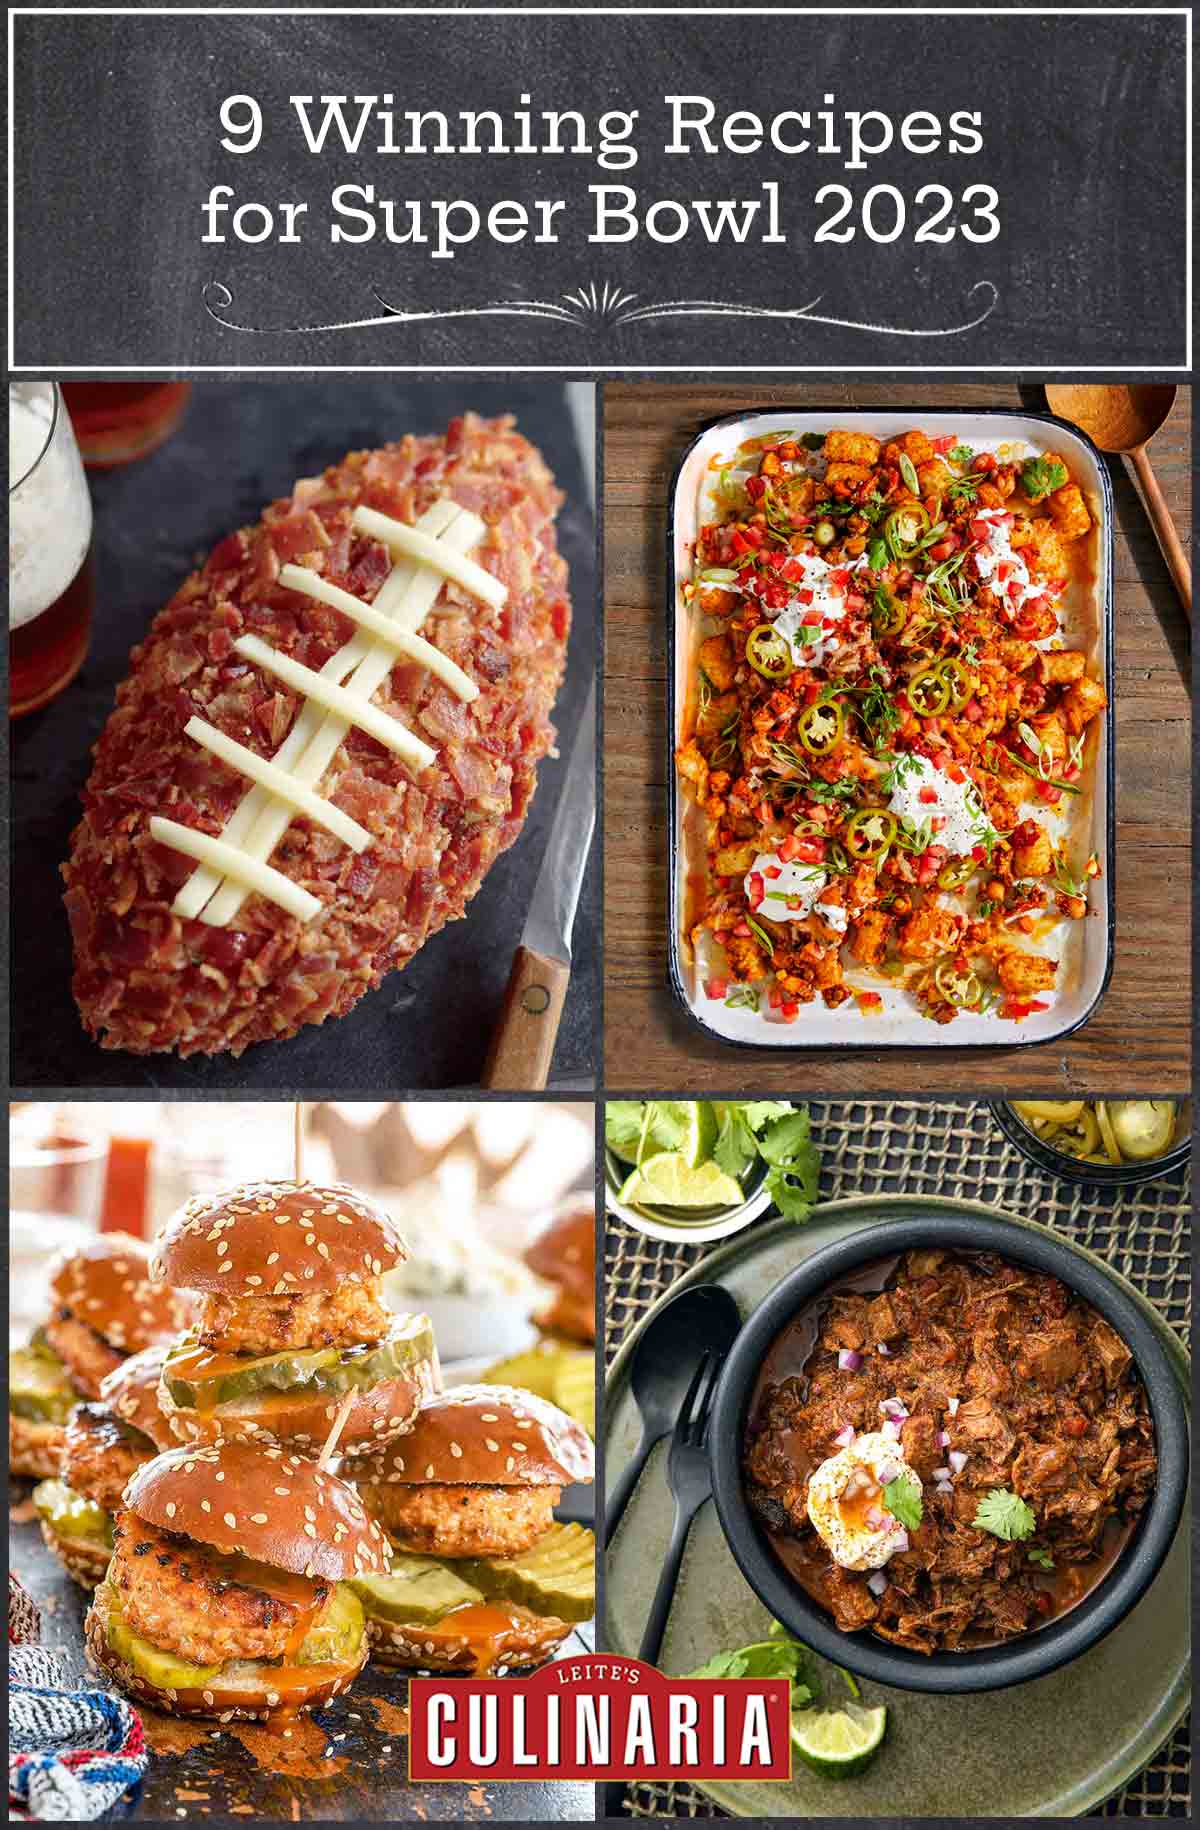 A football-shaped cheese ball, a tray of totchos, a pile of chicken sliders, and a bowl of chili.